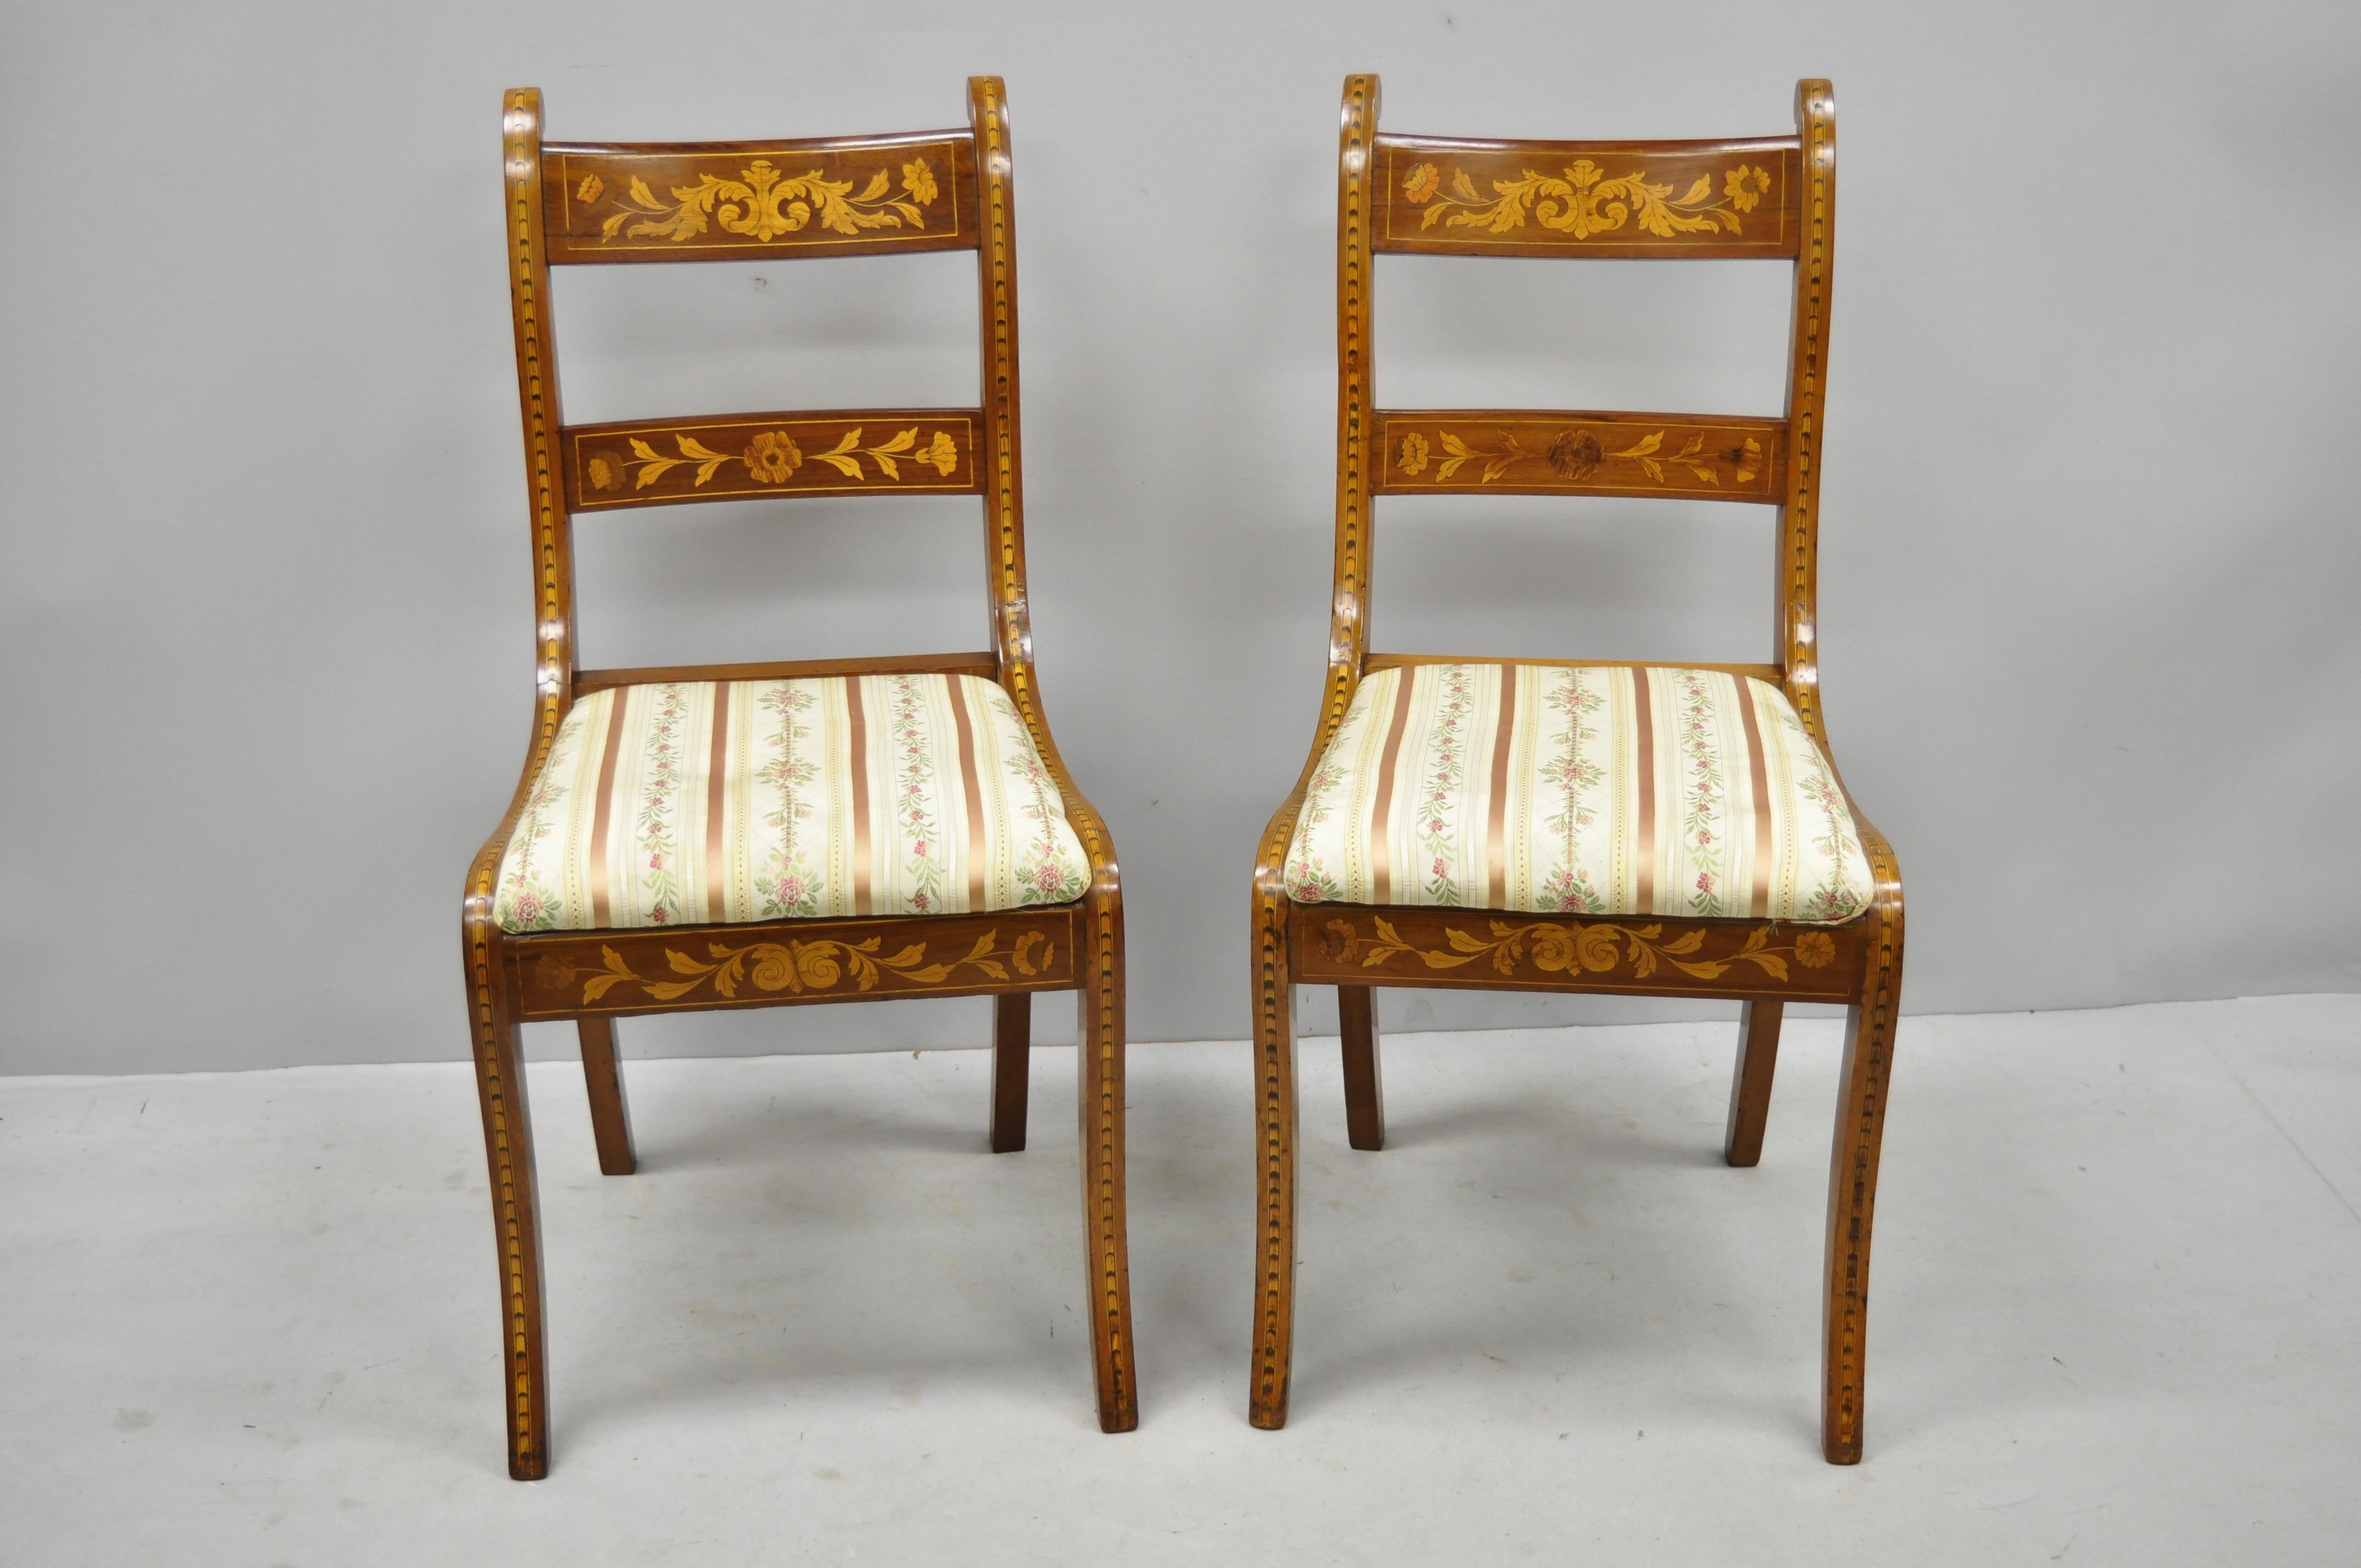 Pair of 19th century satinwood Dutch marquetry inlay Regency side chairs. Item features remarkable satinwood floral inlay throughout, solid wood construction, upholstered seat, shapely saber legs, very nice antique item, circa late 19th century.